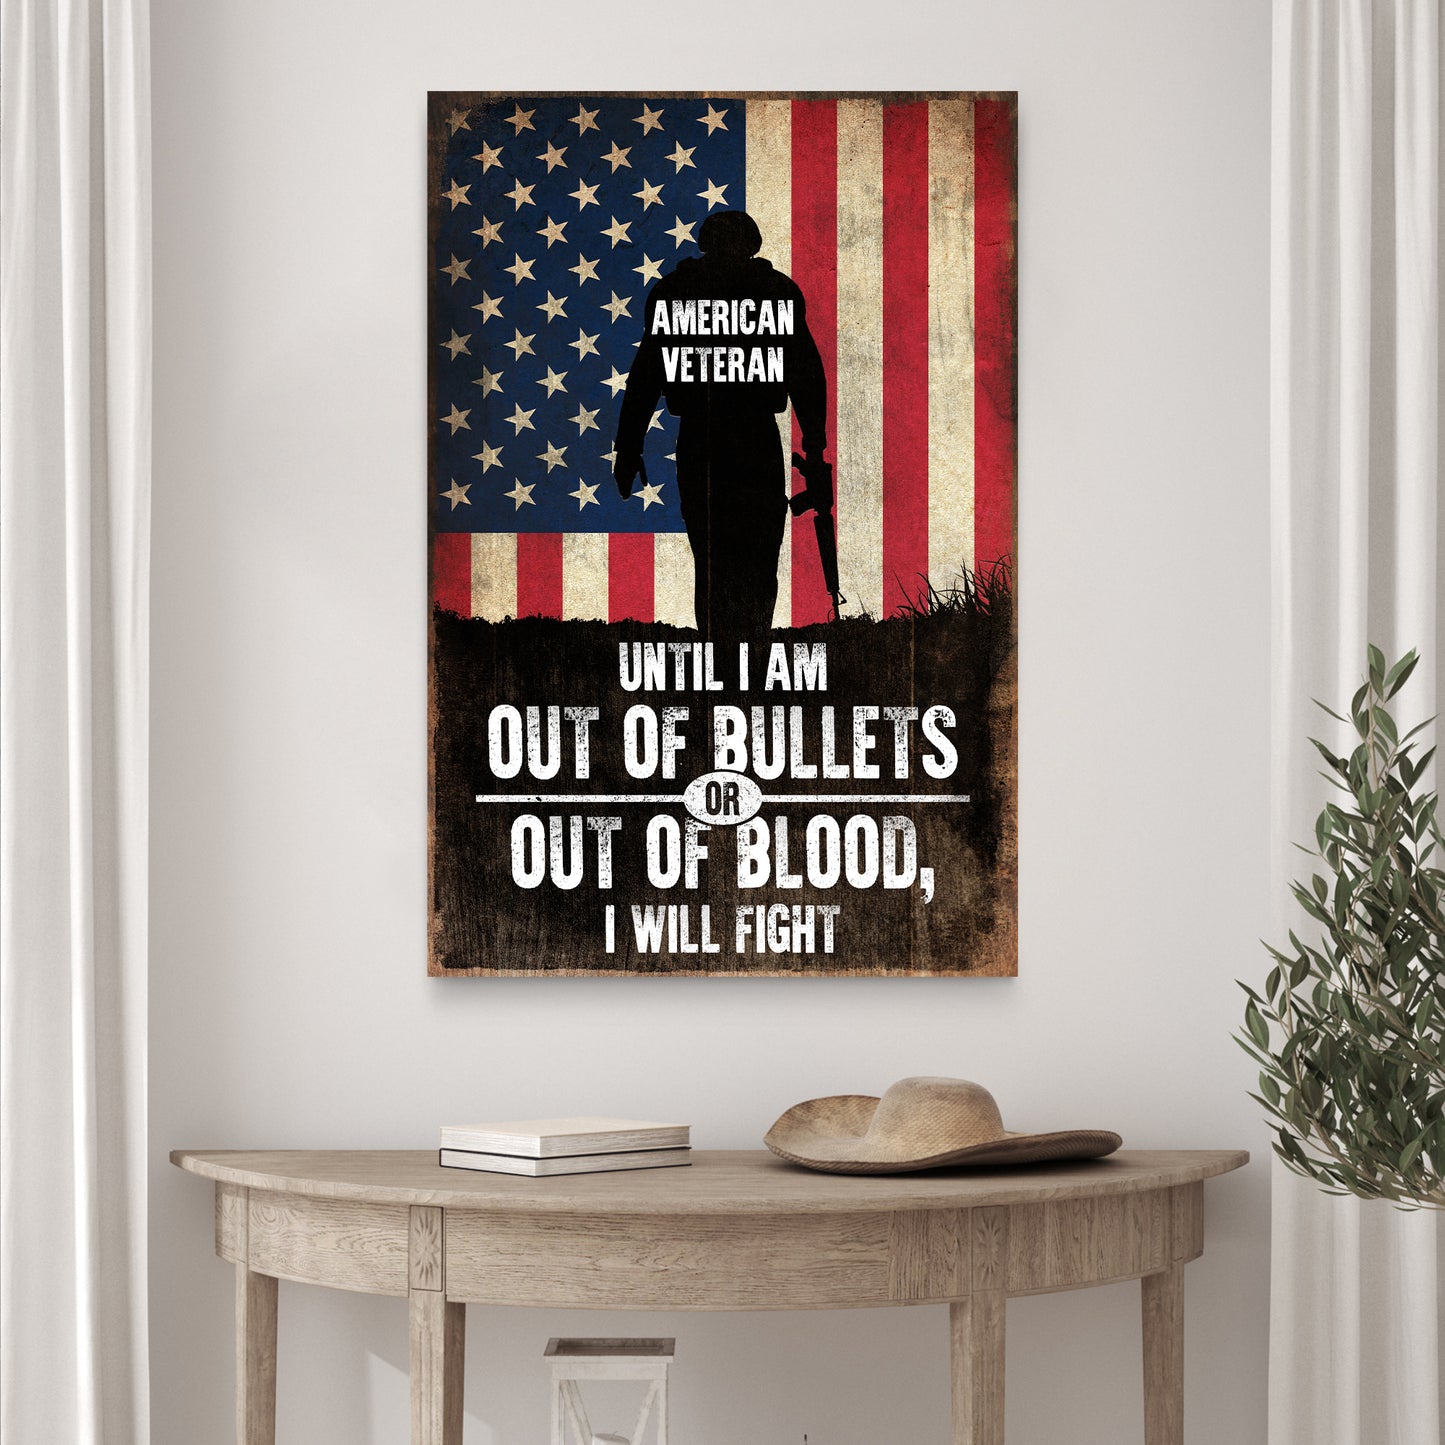 Until I Am Out Of Bullets Sign - Image by Tailored Canvases